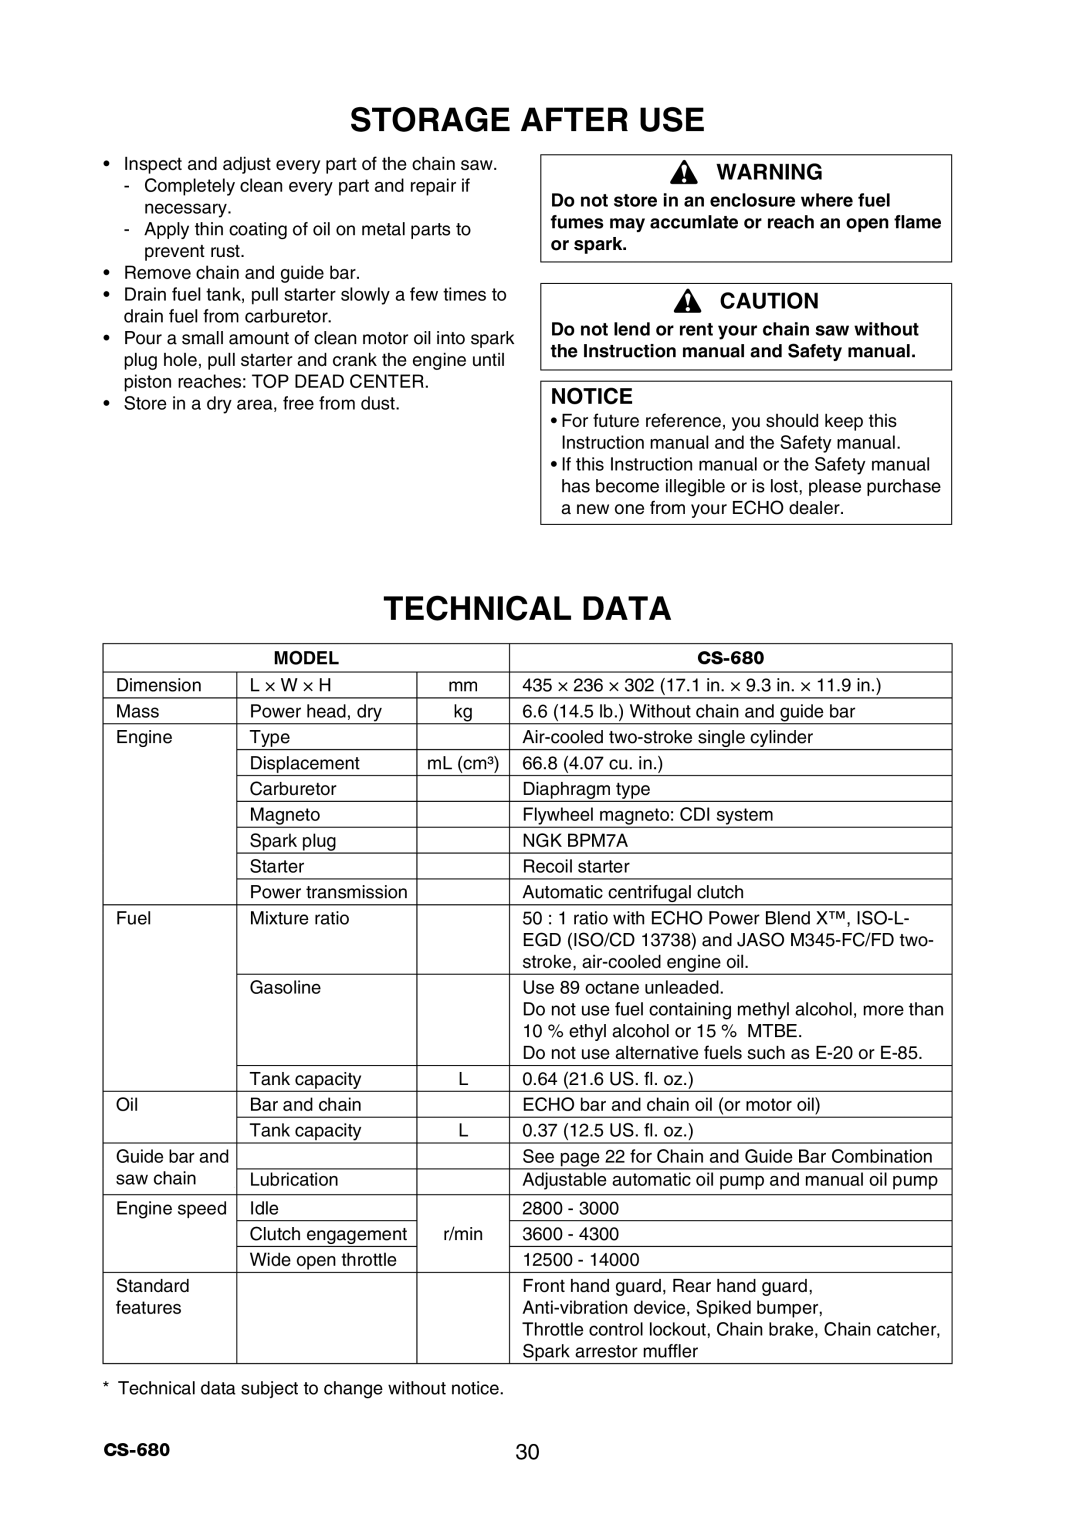 Echo CS-680 instruction manual Storage After Use, Technical Data, Model 